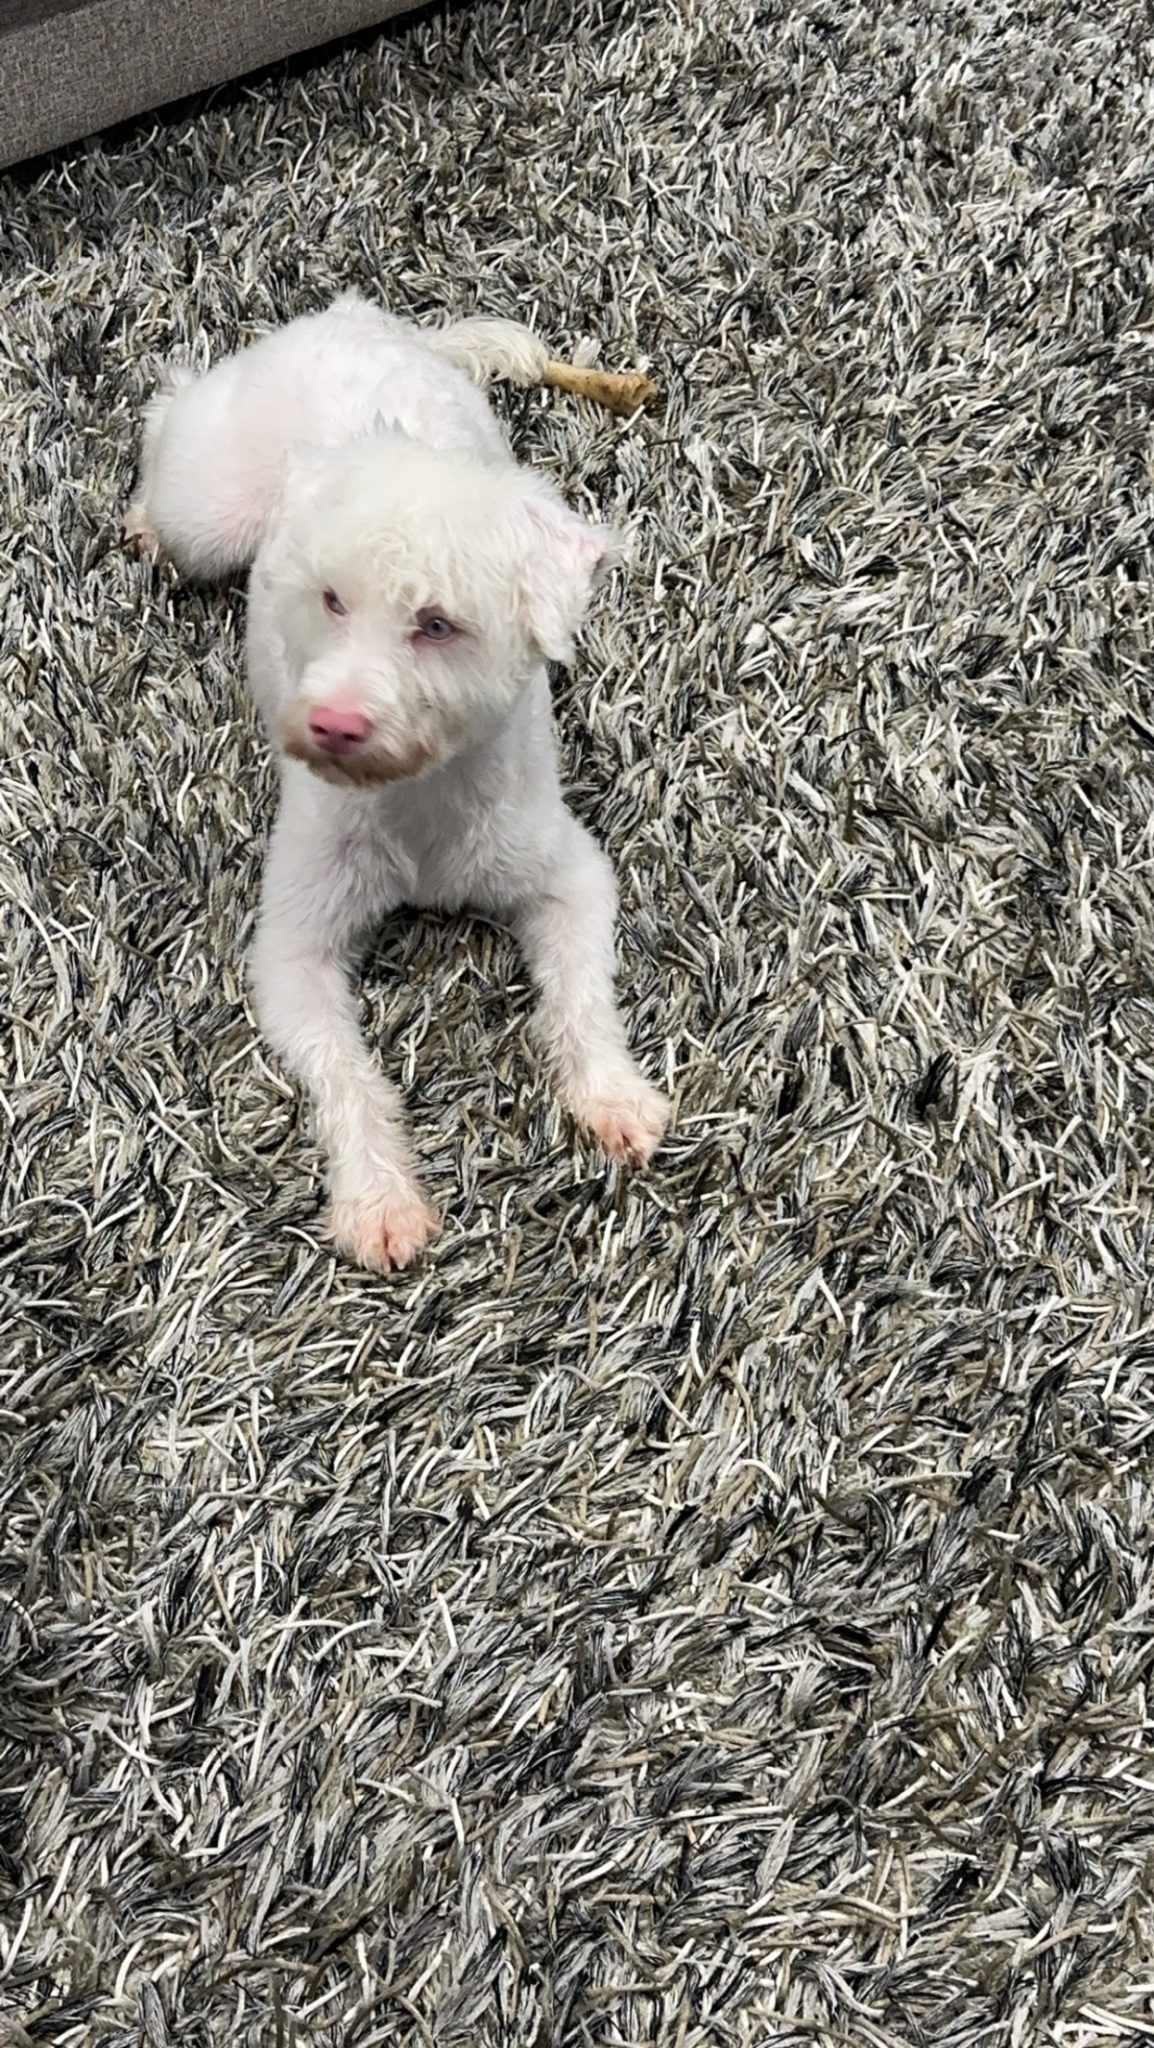 Schnoodle looking for new home